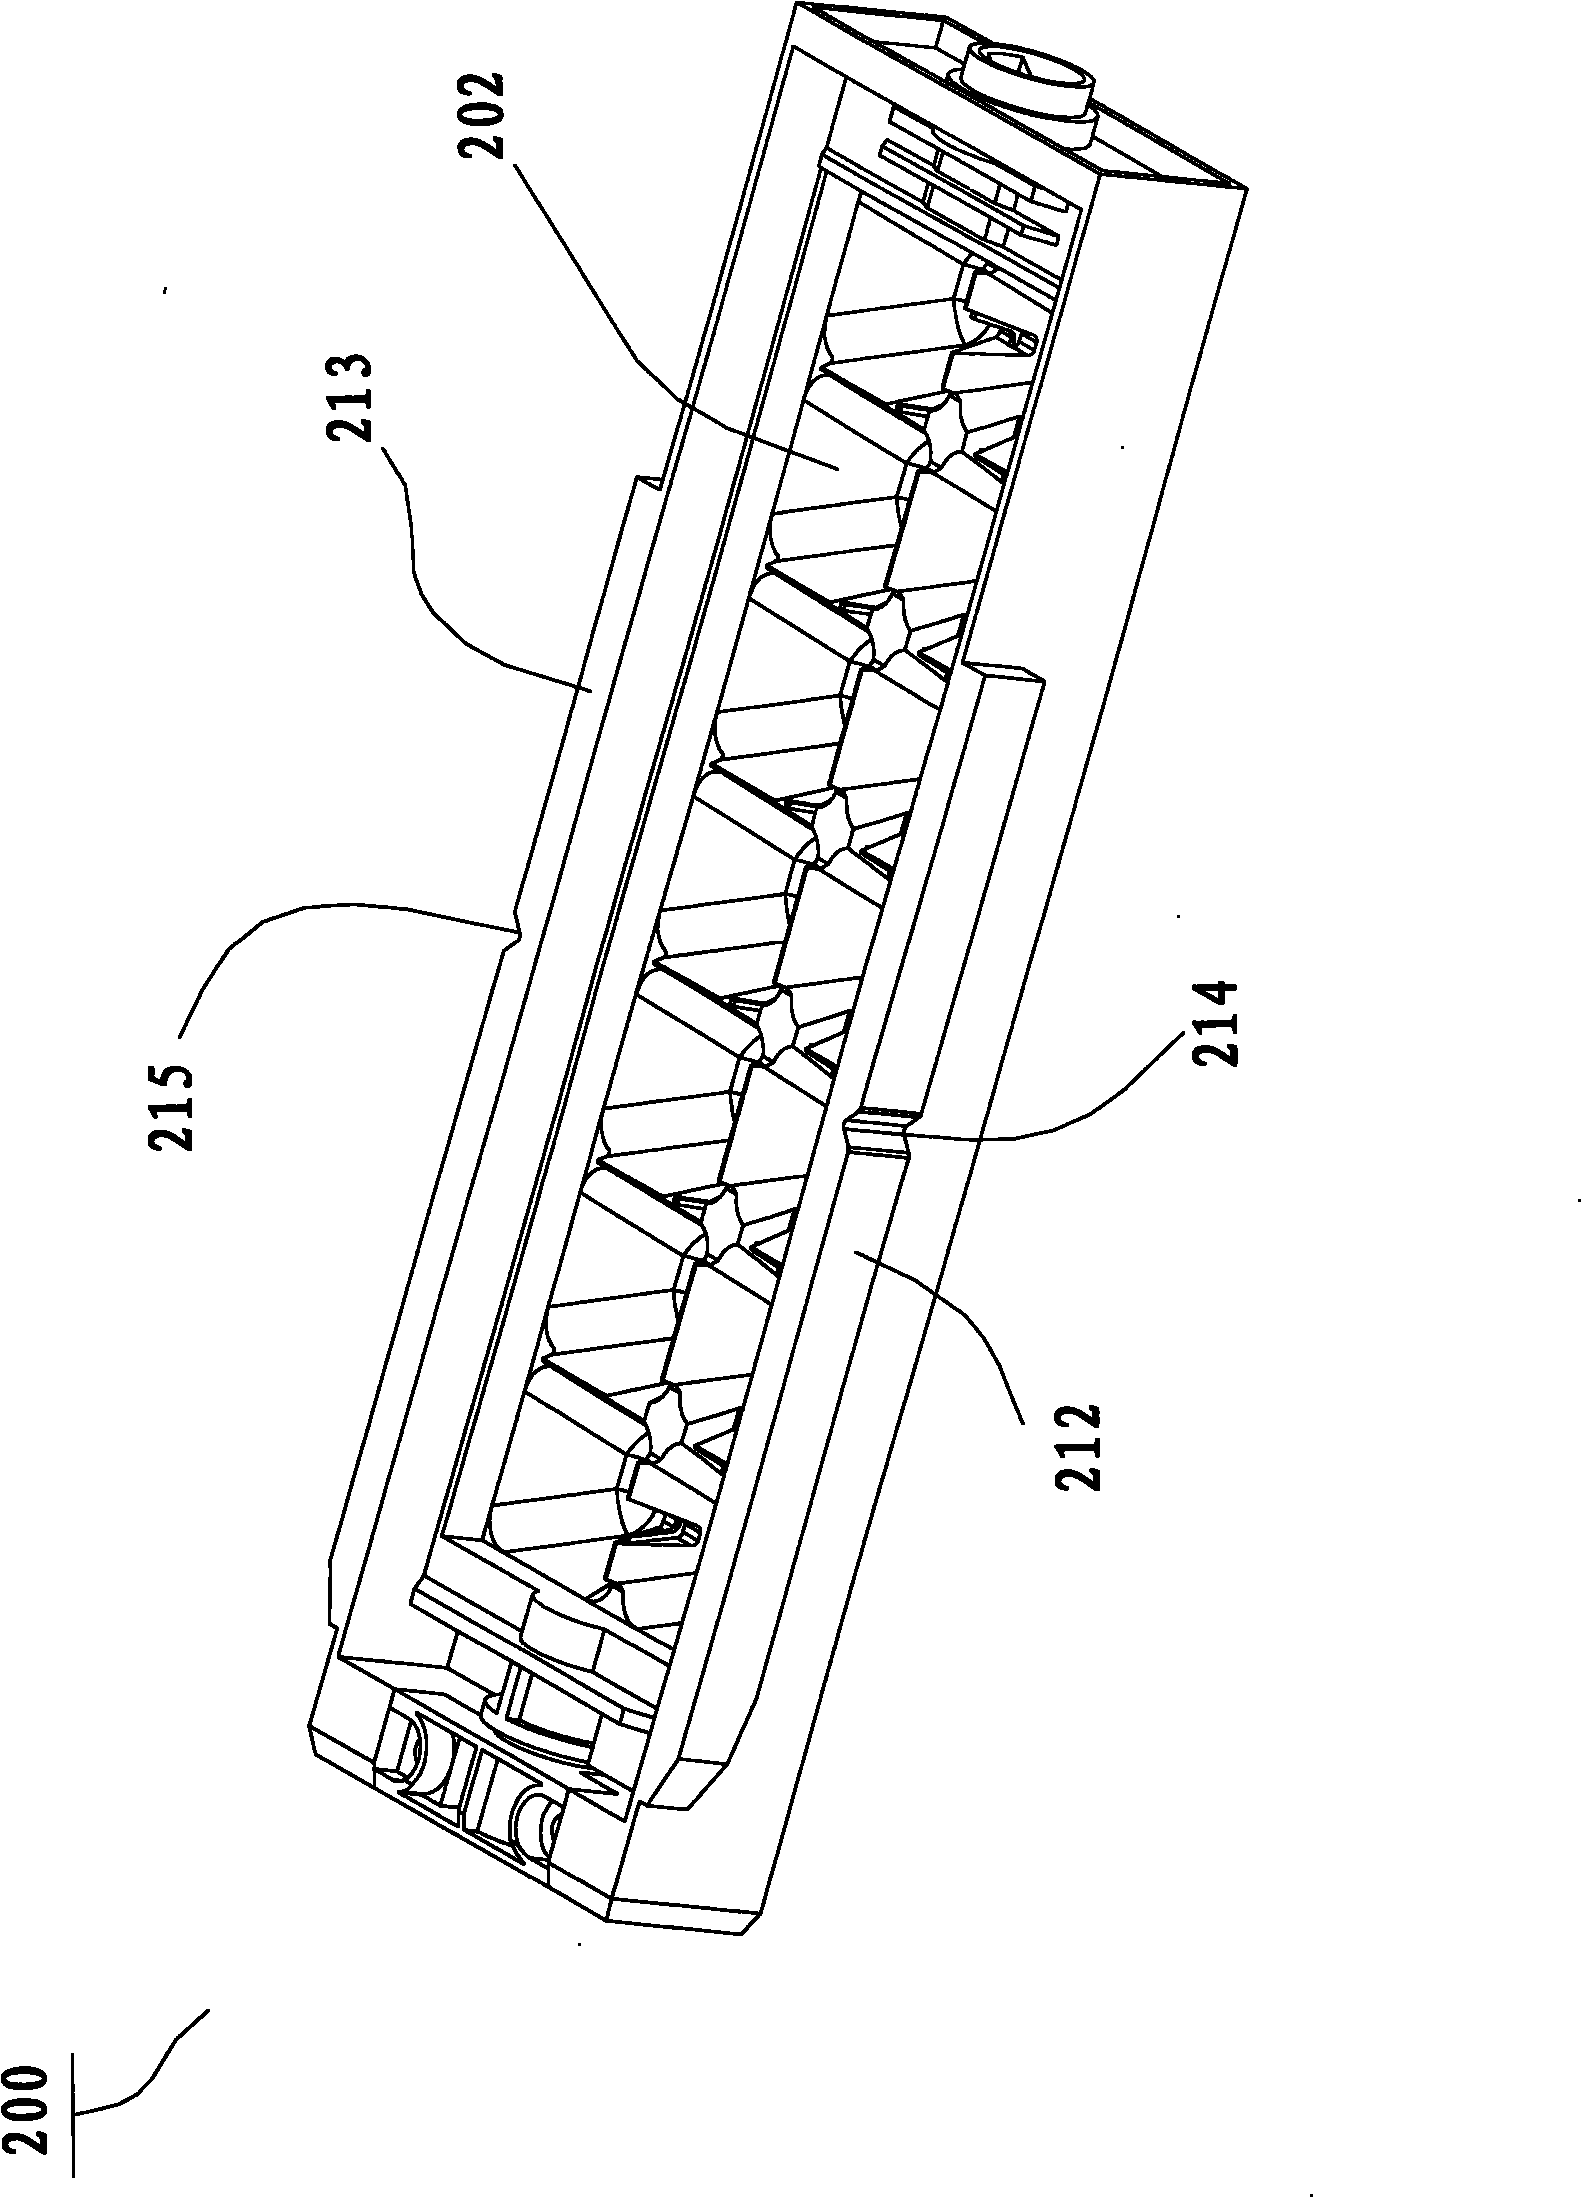 Ice-making motor assembly and automatic ice machine